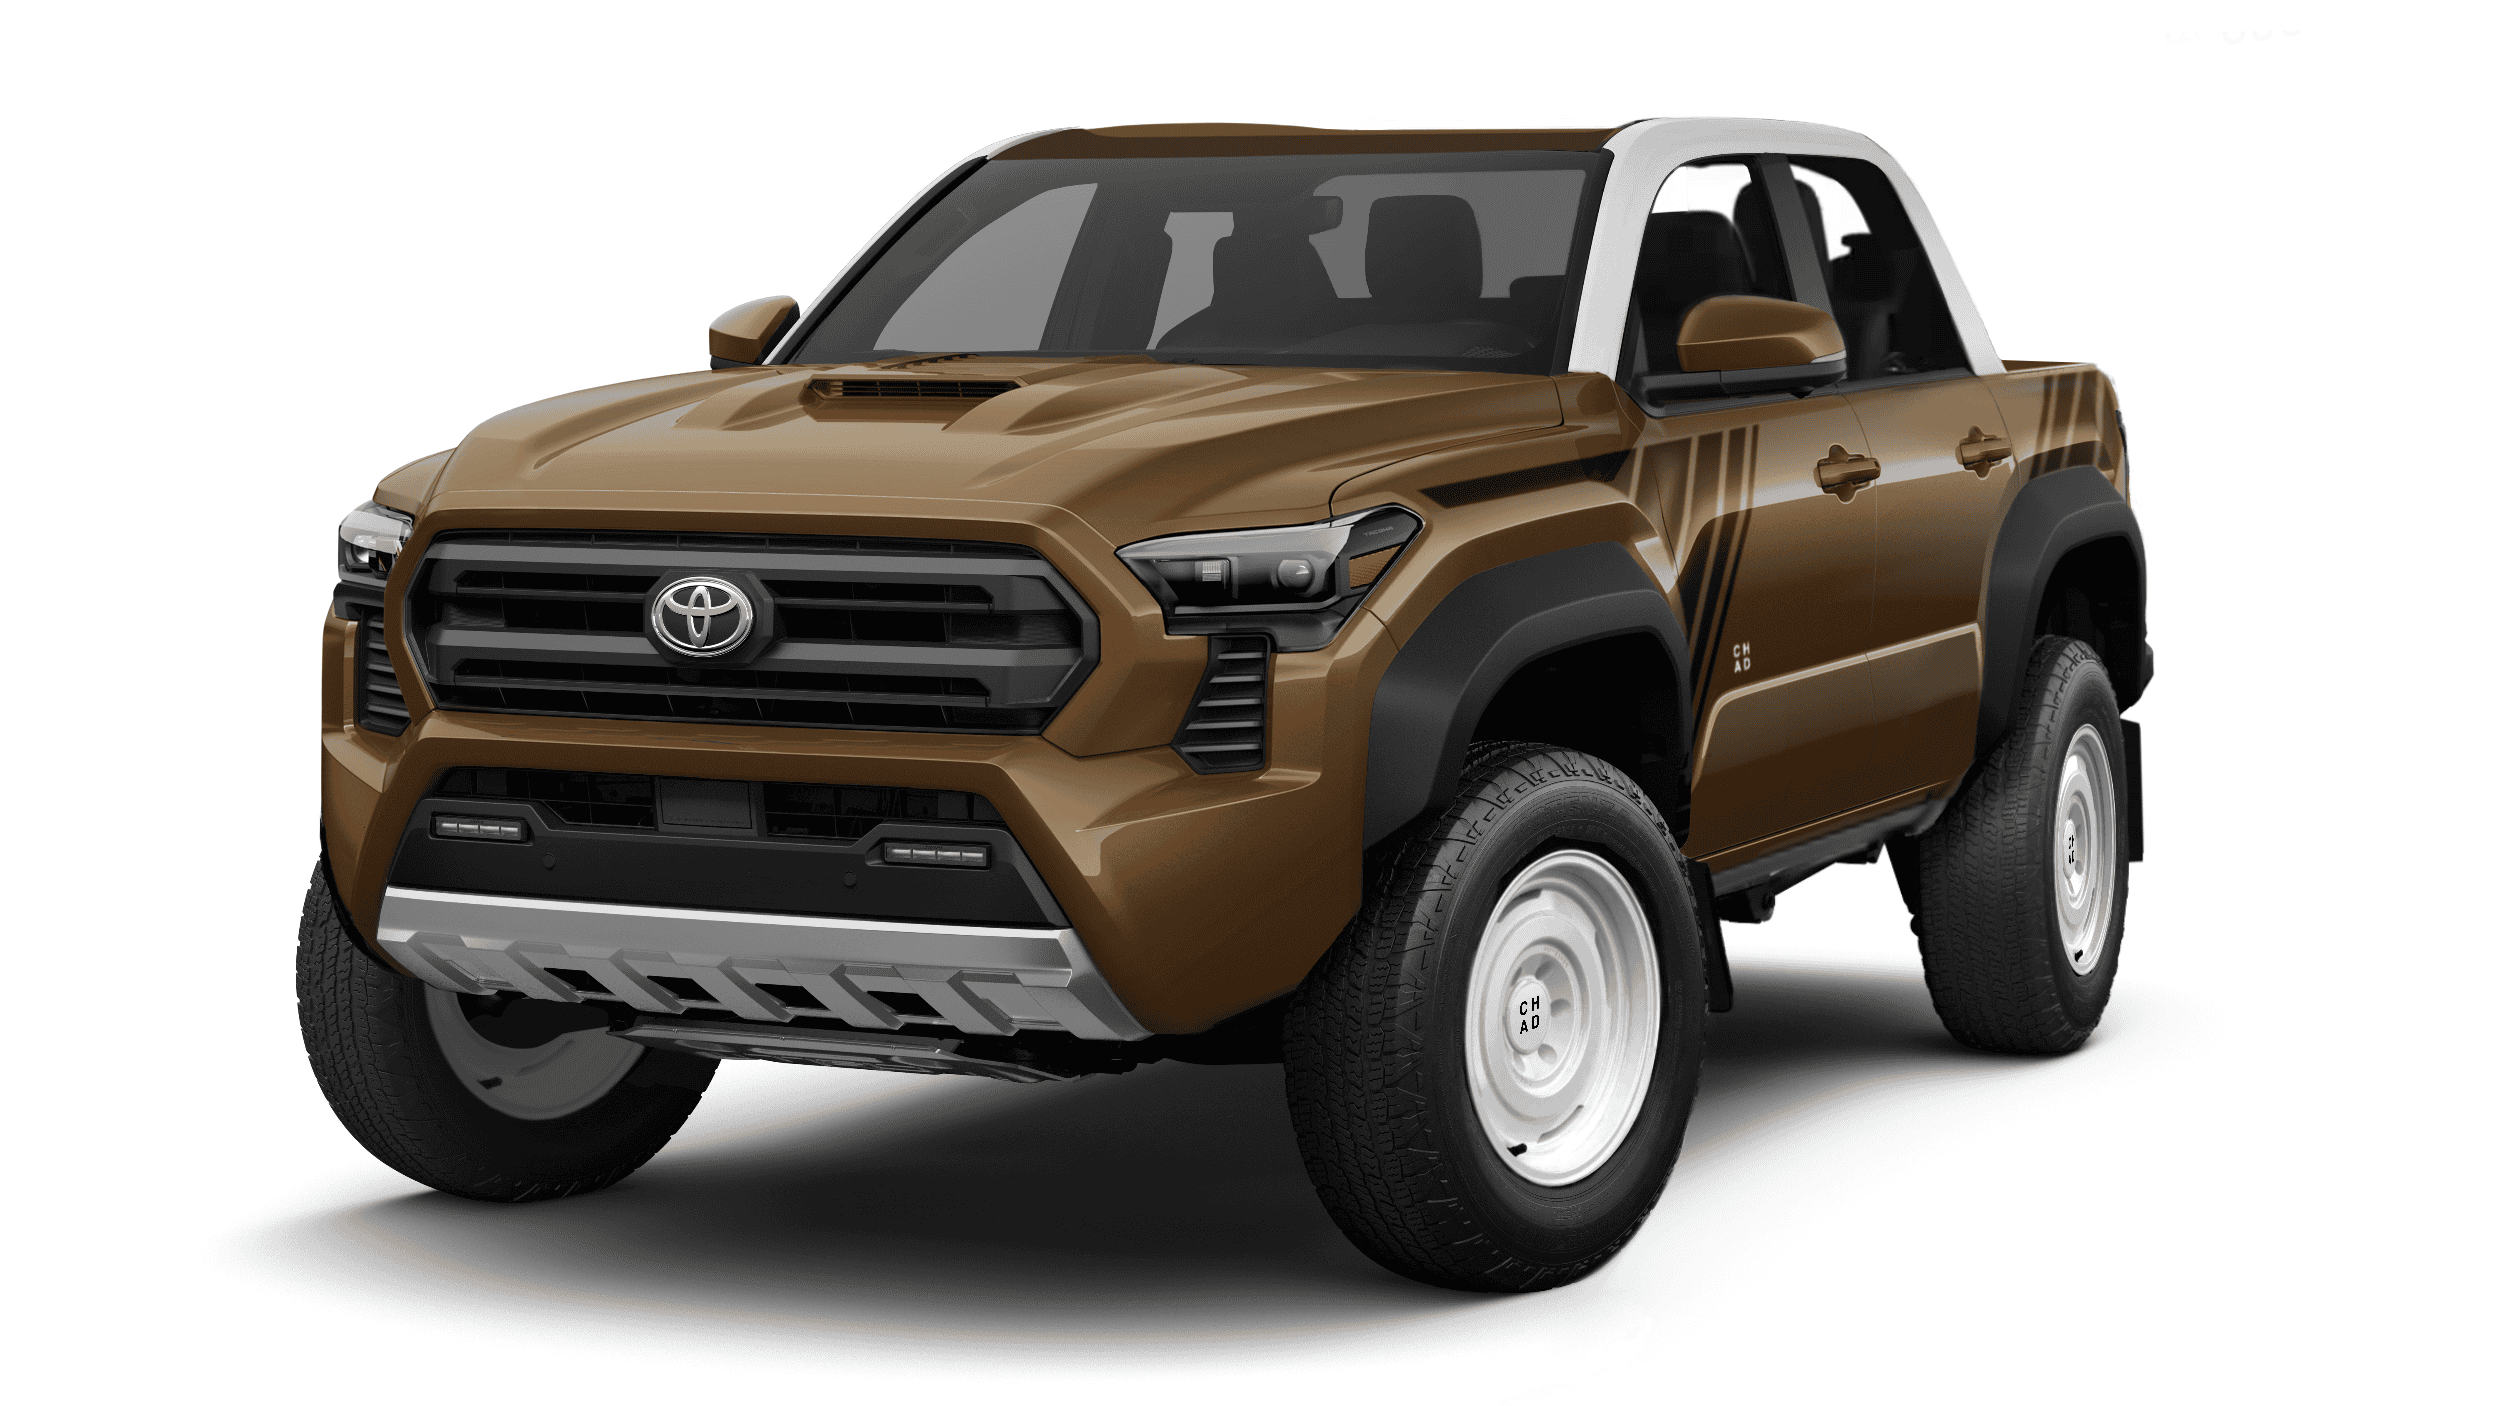 2025 Toyota 4runner 2025 4Runner (6th Gen) News, Specs, Engines, Release Date, Production Date & Preview Renderings -- Insider Info (as of 7/30/23) IMG_7552